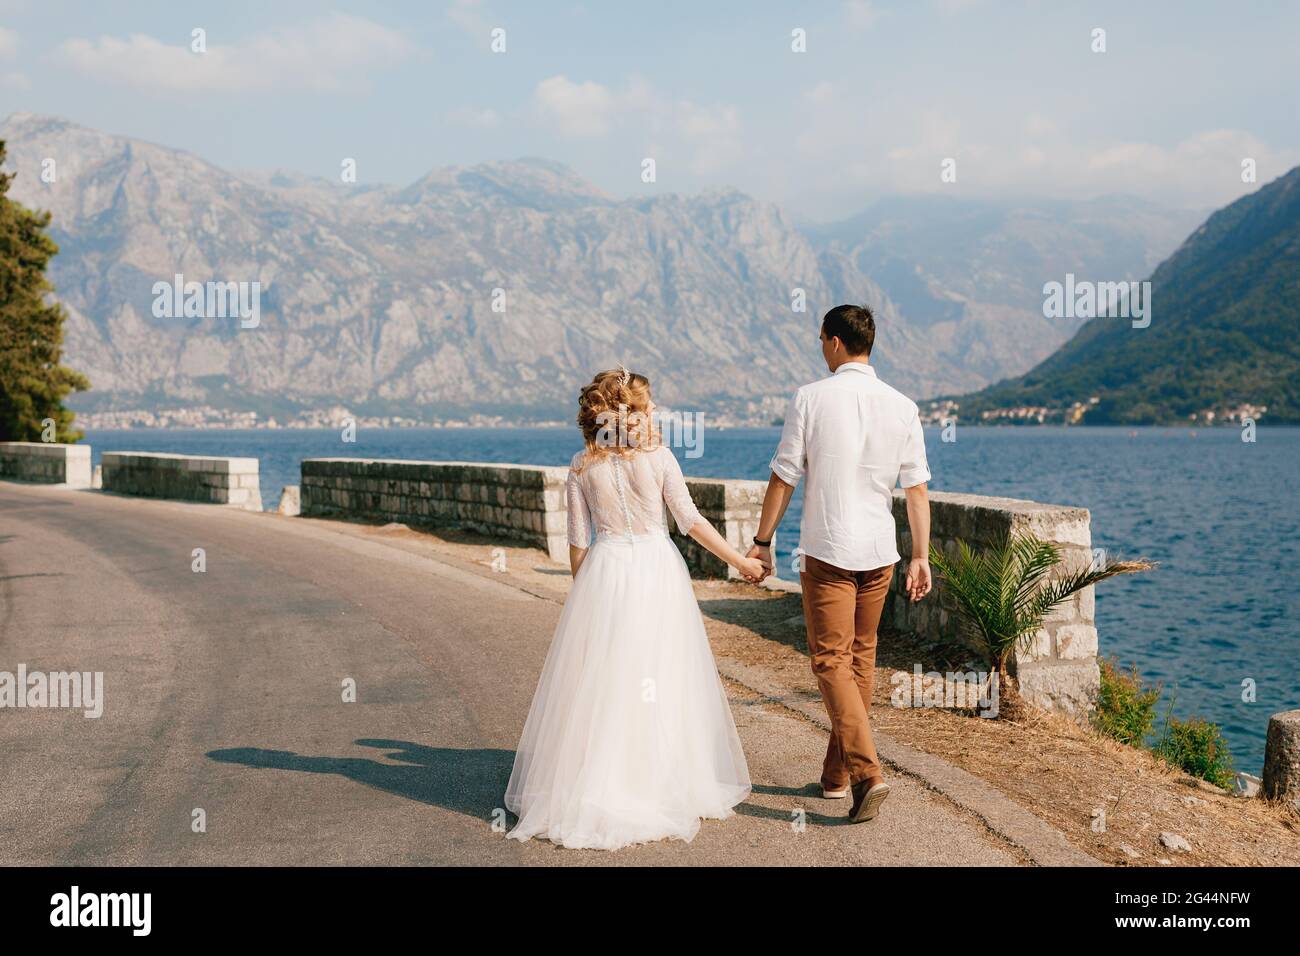 The bride and groom walk hand in hand along the road along the coast in the Bay of Kotor near Perast, back view Stock Photo